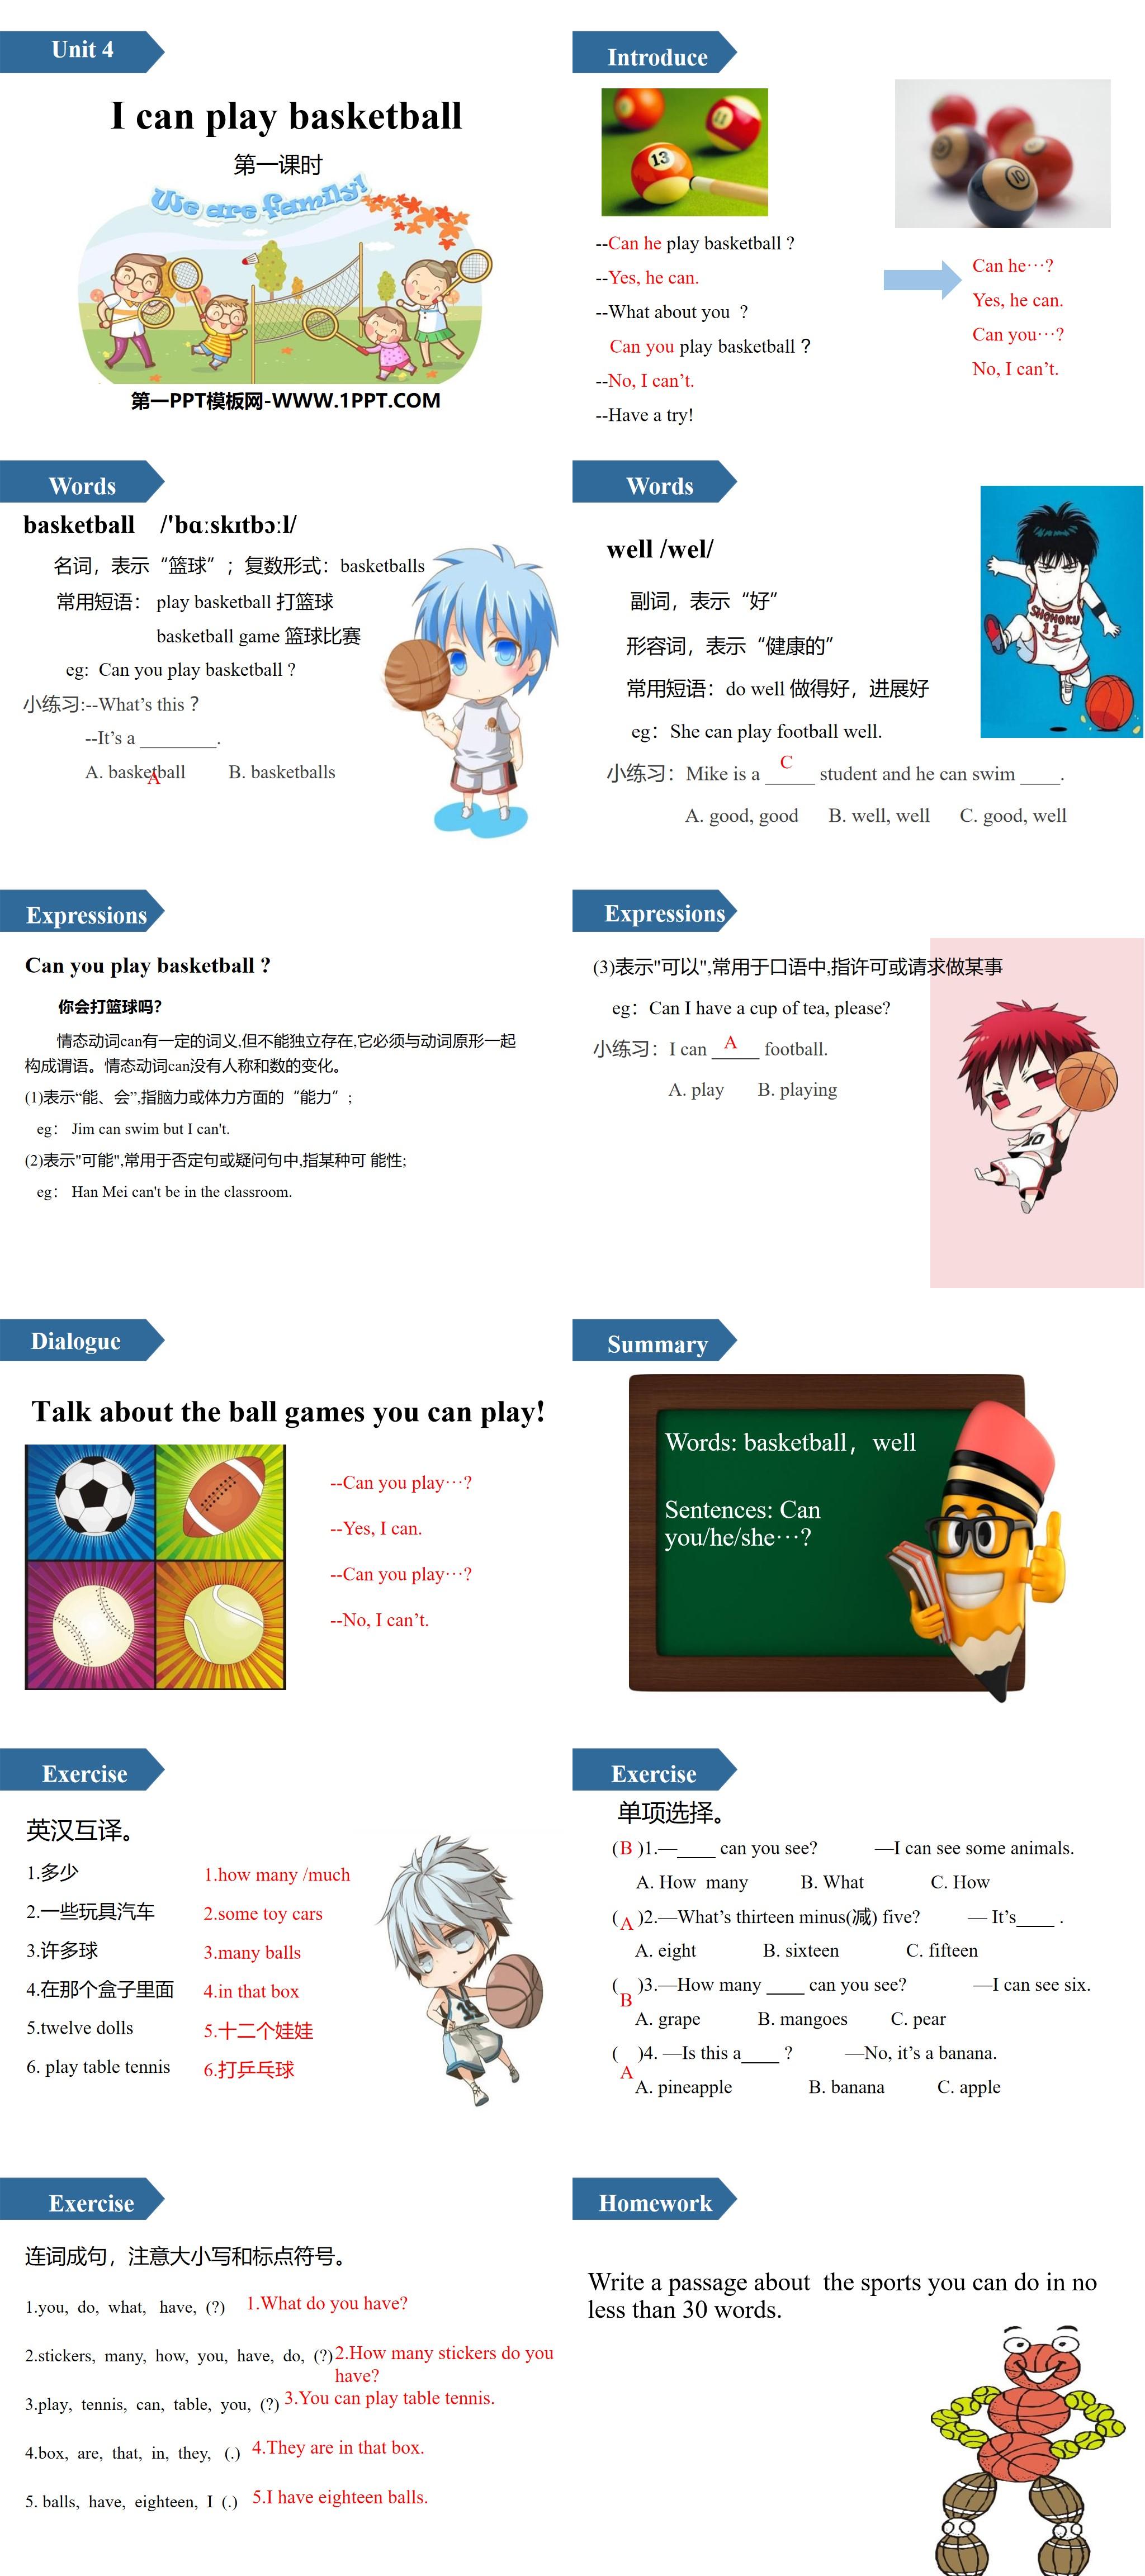 《I can play basketball》PPT(第一课时)
（2）